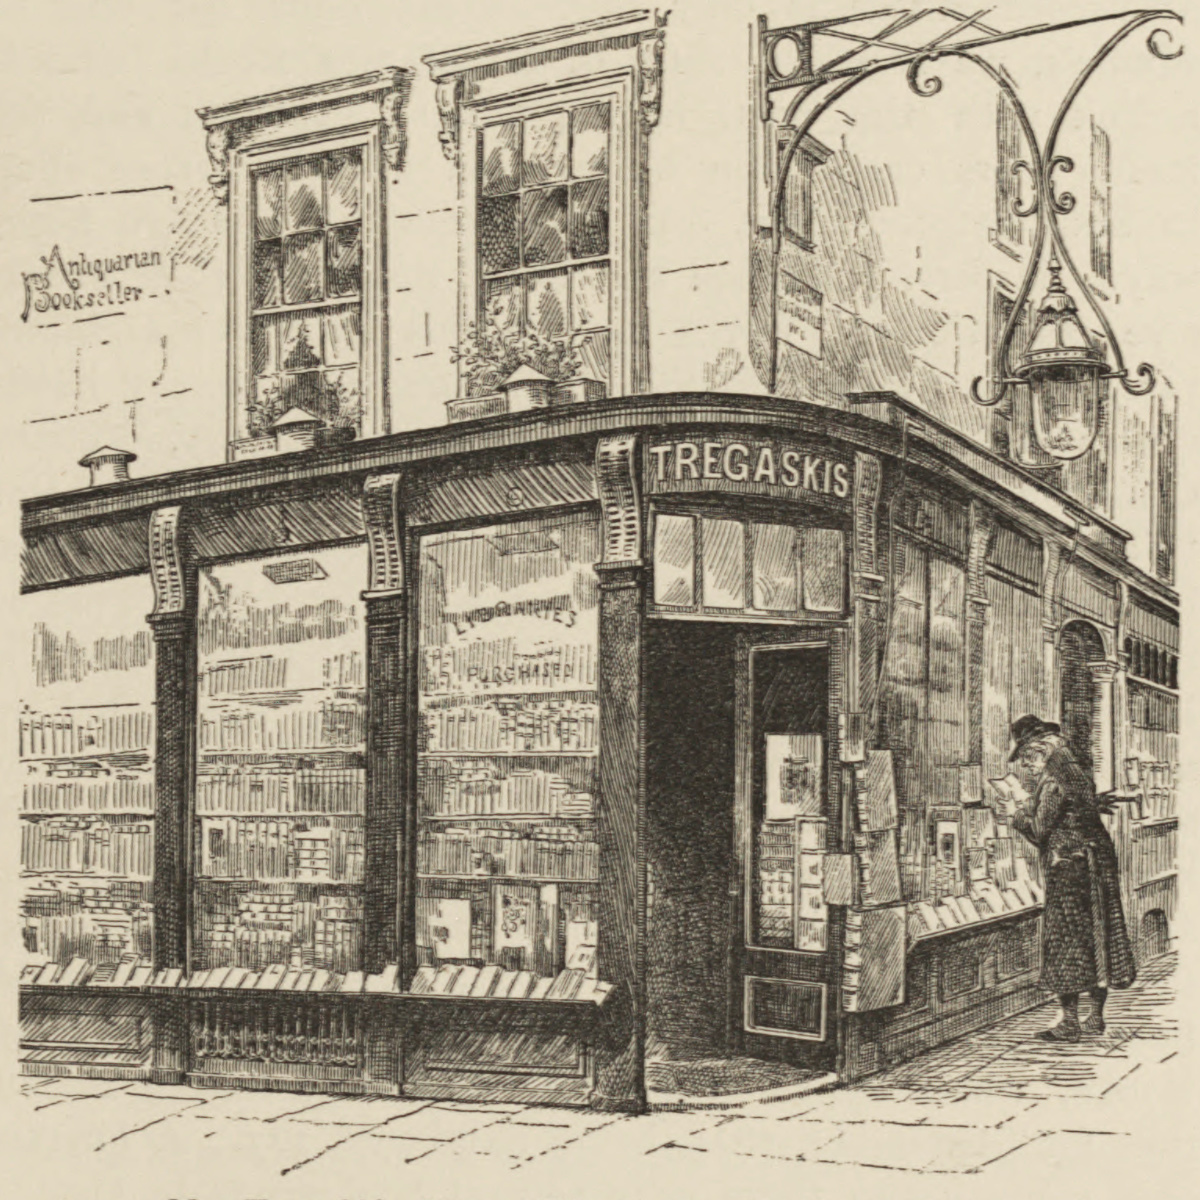 Mr. Tregaskis’s Shop – ‘The Caxton Head’ – in Holborn. Illustration from W. Roberts, The Book-Hunter in London: Historical and Other Studies of Collectors and Collecting (Chicago: A. C. McClurg & Co., 1895), 205. Courtesy of the Internet Archive (https://archive.org/details/bookhunterinlond00robeuoft).